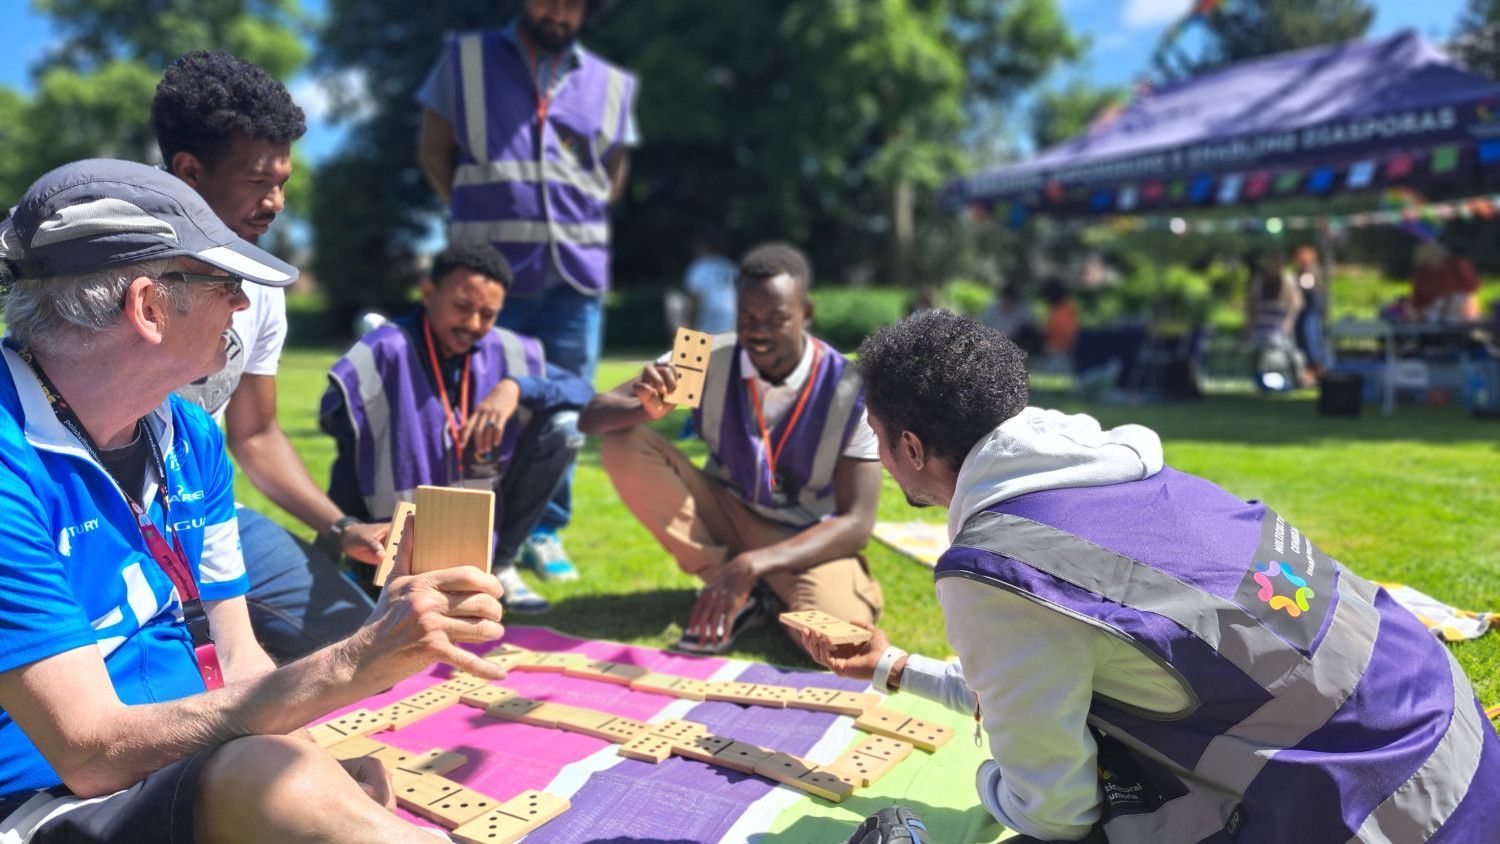 A group of men sitting wearing high-vis sitting and playing dominoes. They look like they're having a great time!